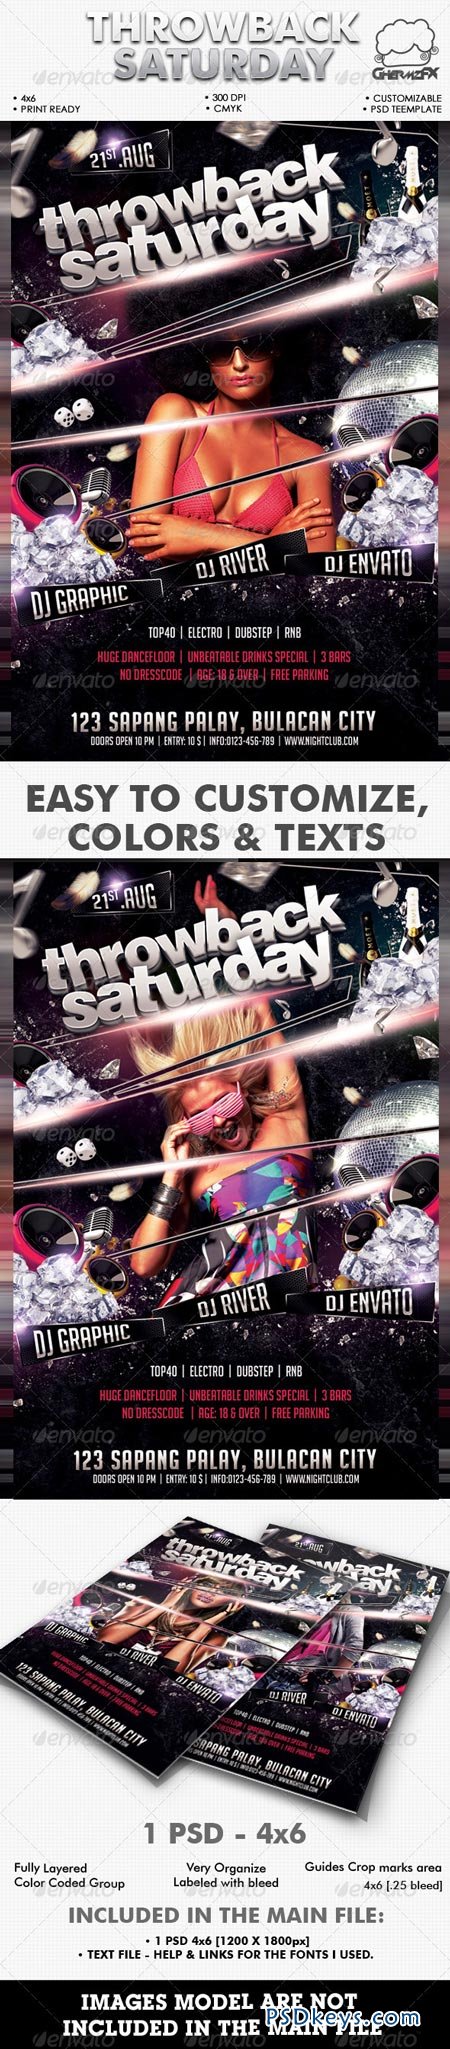 Throwback Saturday Flyer Template 2627695